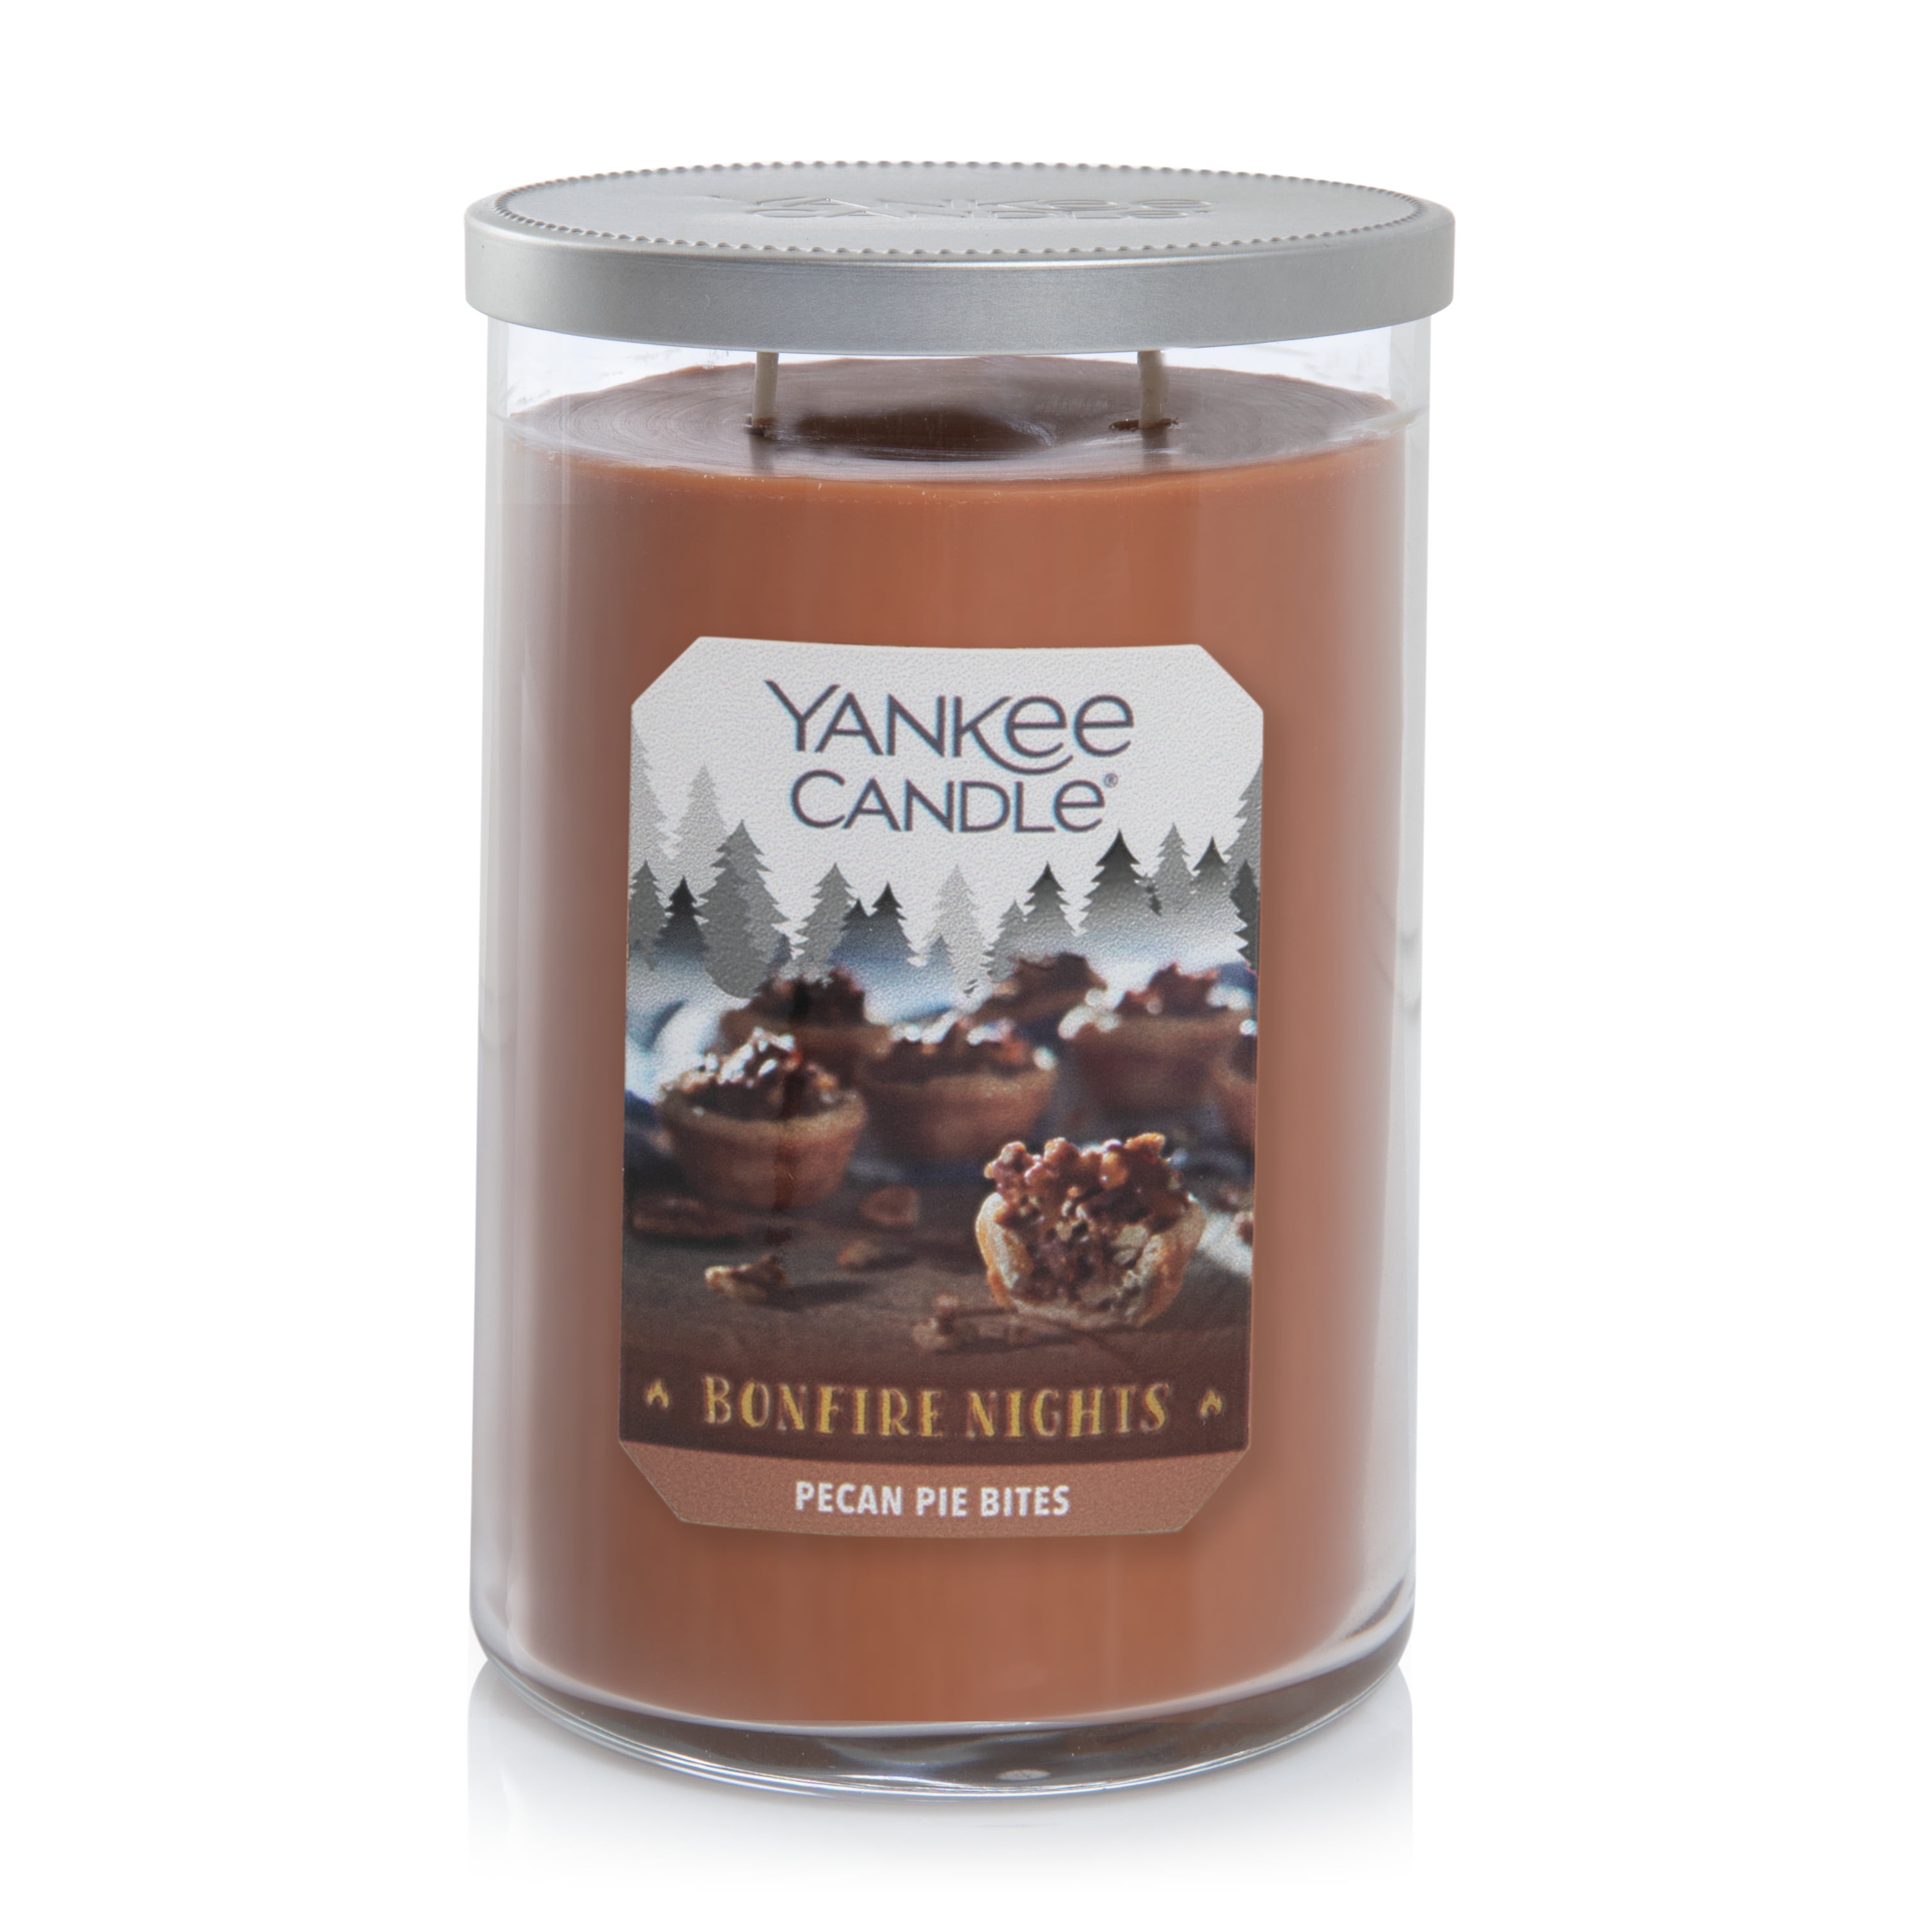 Yankee Candle Pecan Pie Bites - Large 2-Wick Tumbler Scented Candle